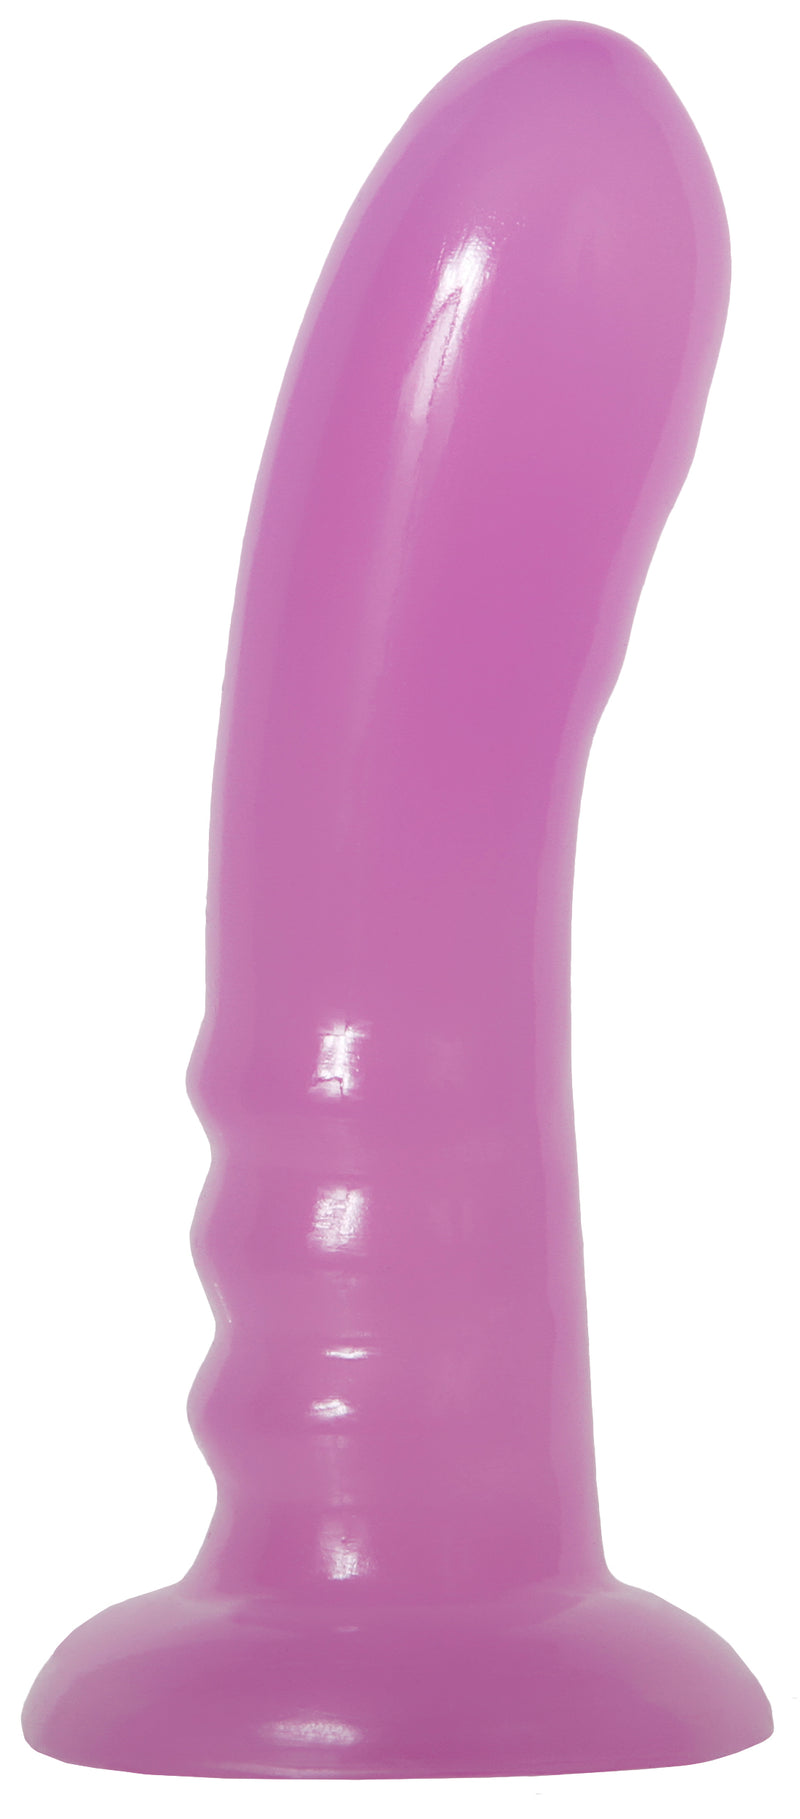 Adventurous Strap-On Kit with Three Dildo Sizes and Adjustable Harness for Ultimate Pleasure